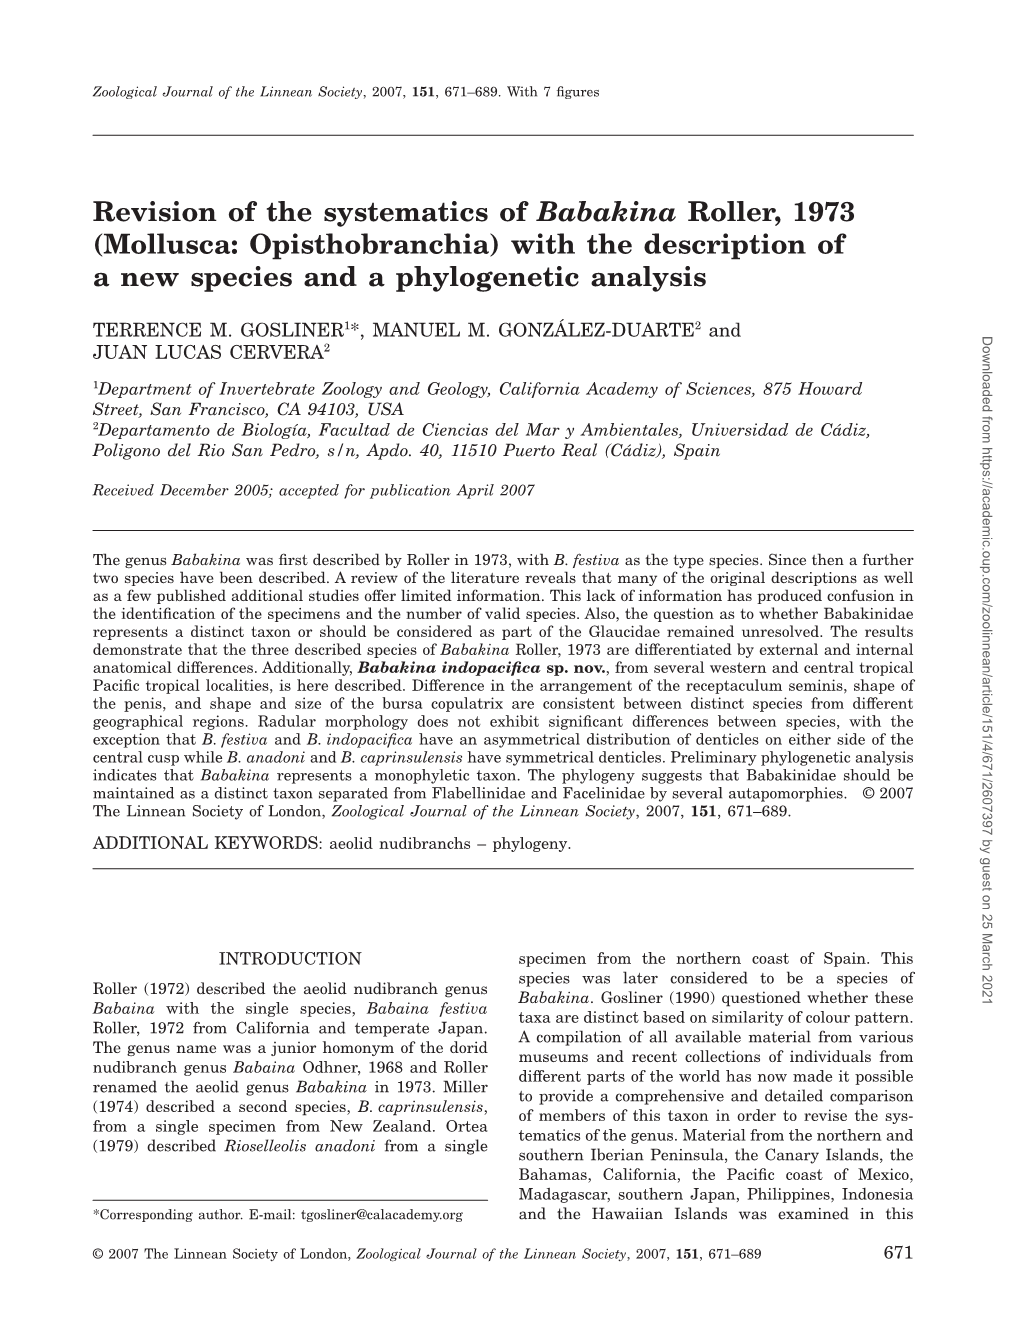 Revision of the Systematics of Babakina Roller, 1973 (Mollusca: Opisthobranchia) with the Description of a New Species and a Phylogenetic Analysis